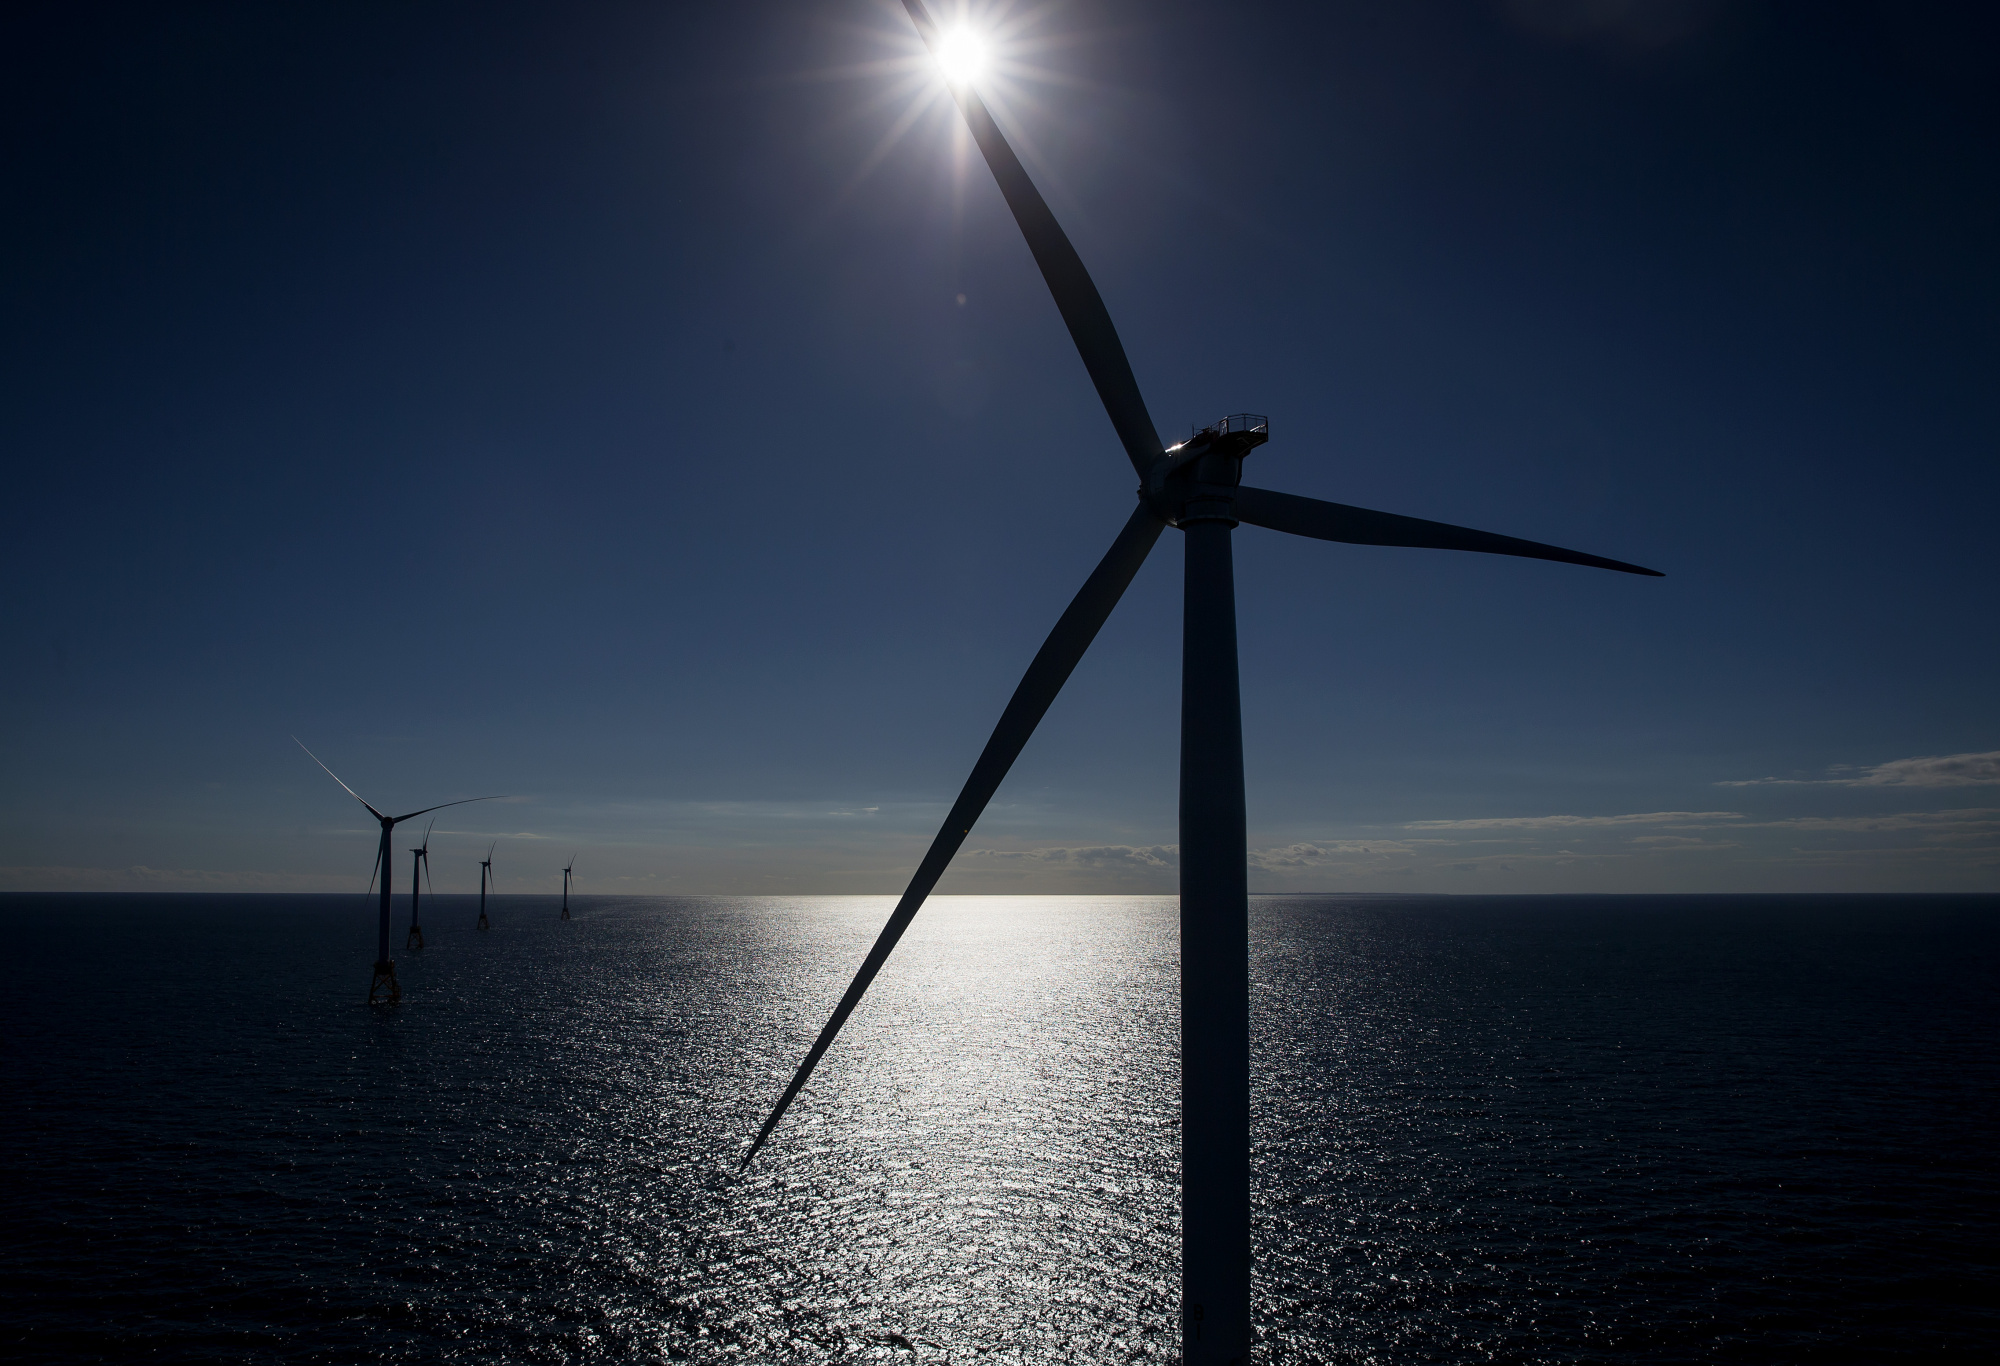 America's First Offshore Wind Farm